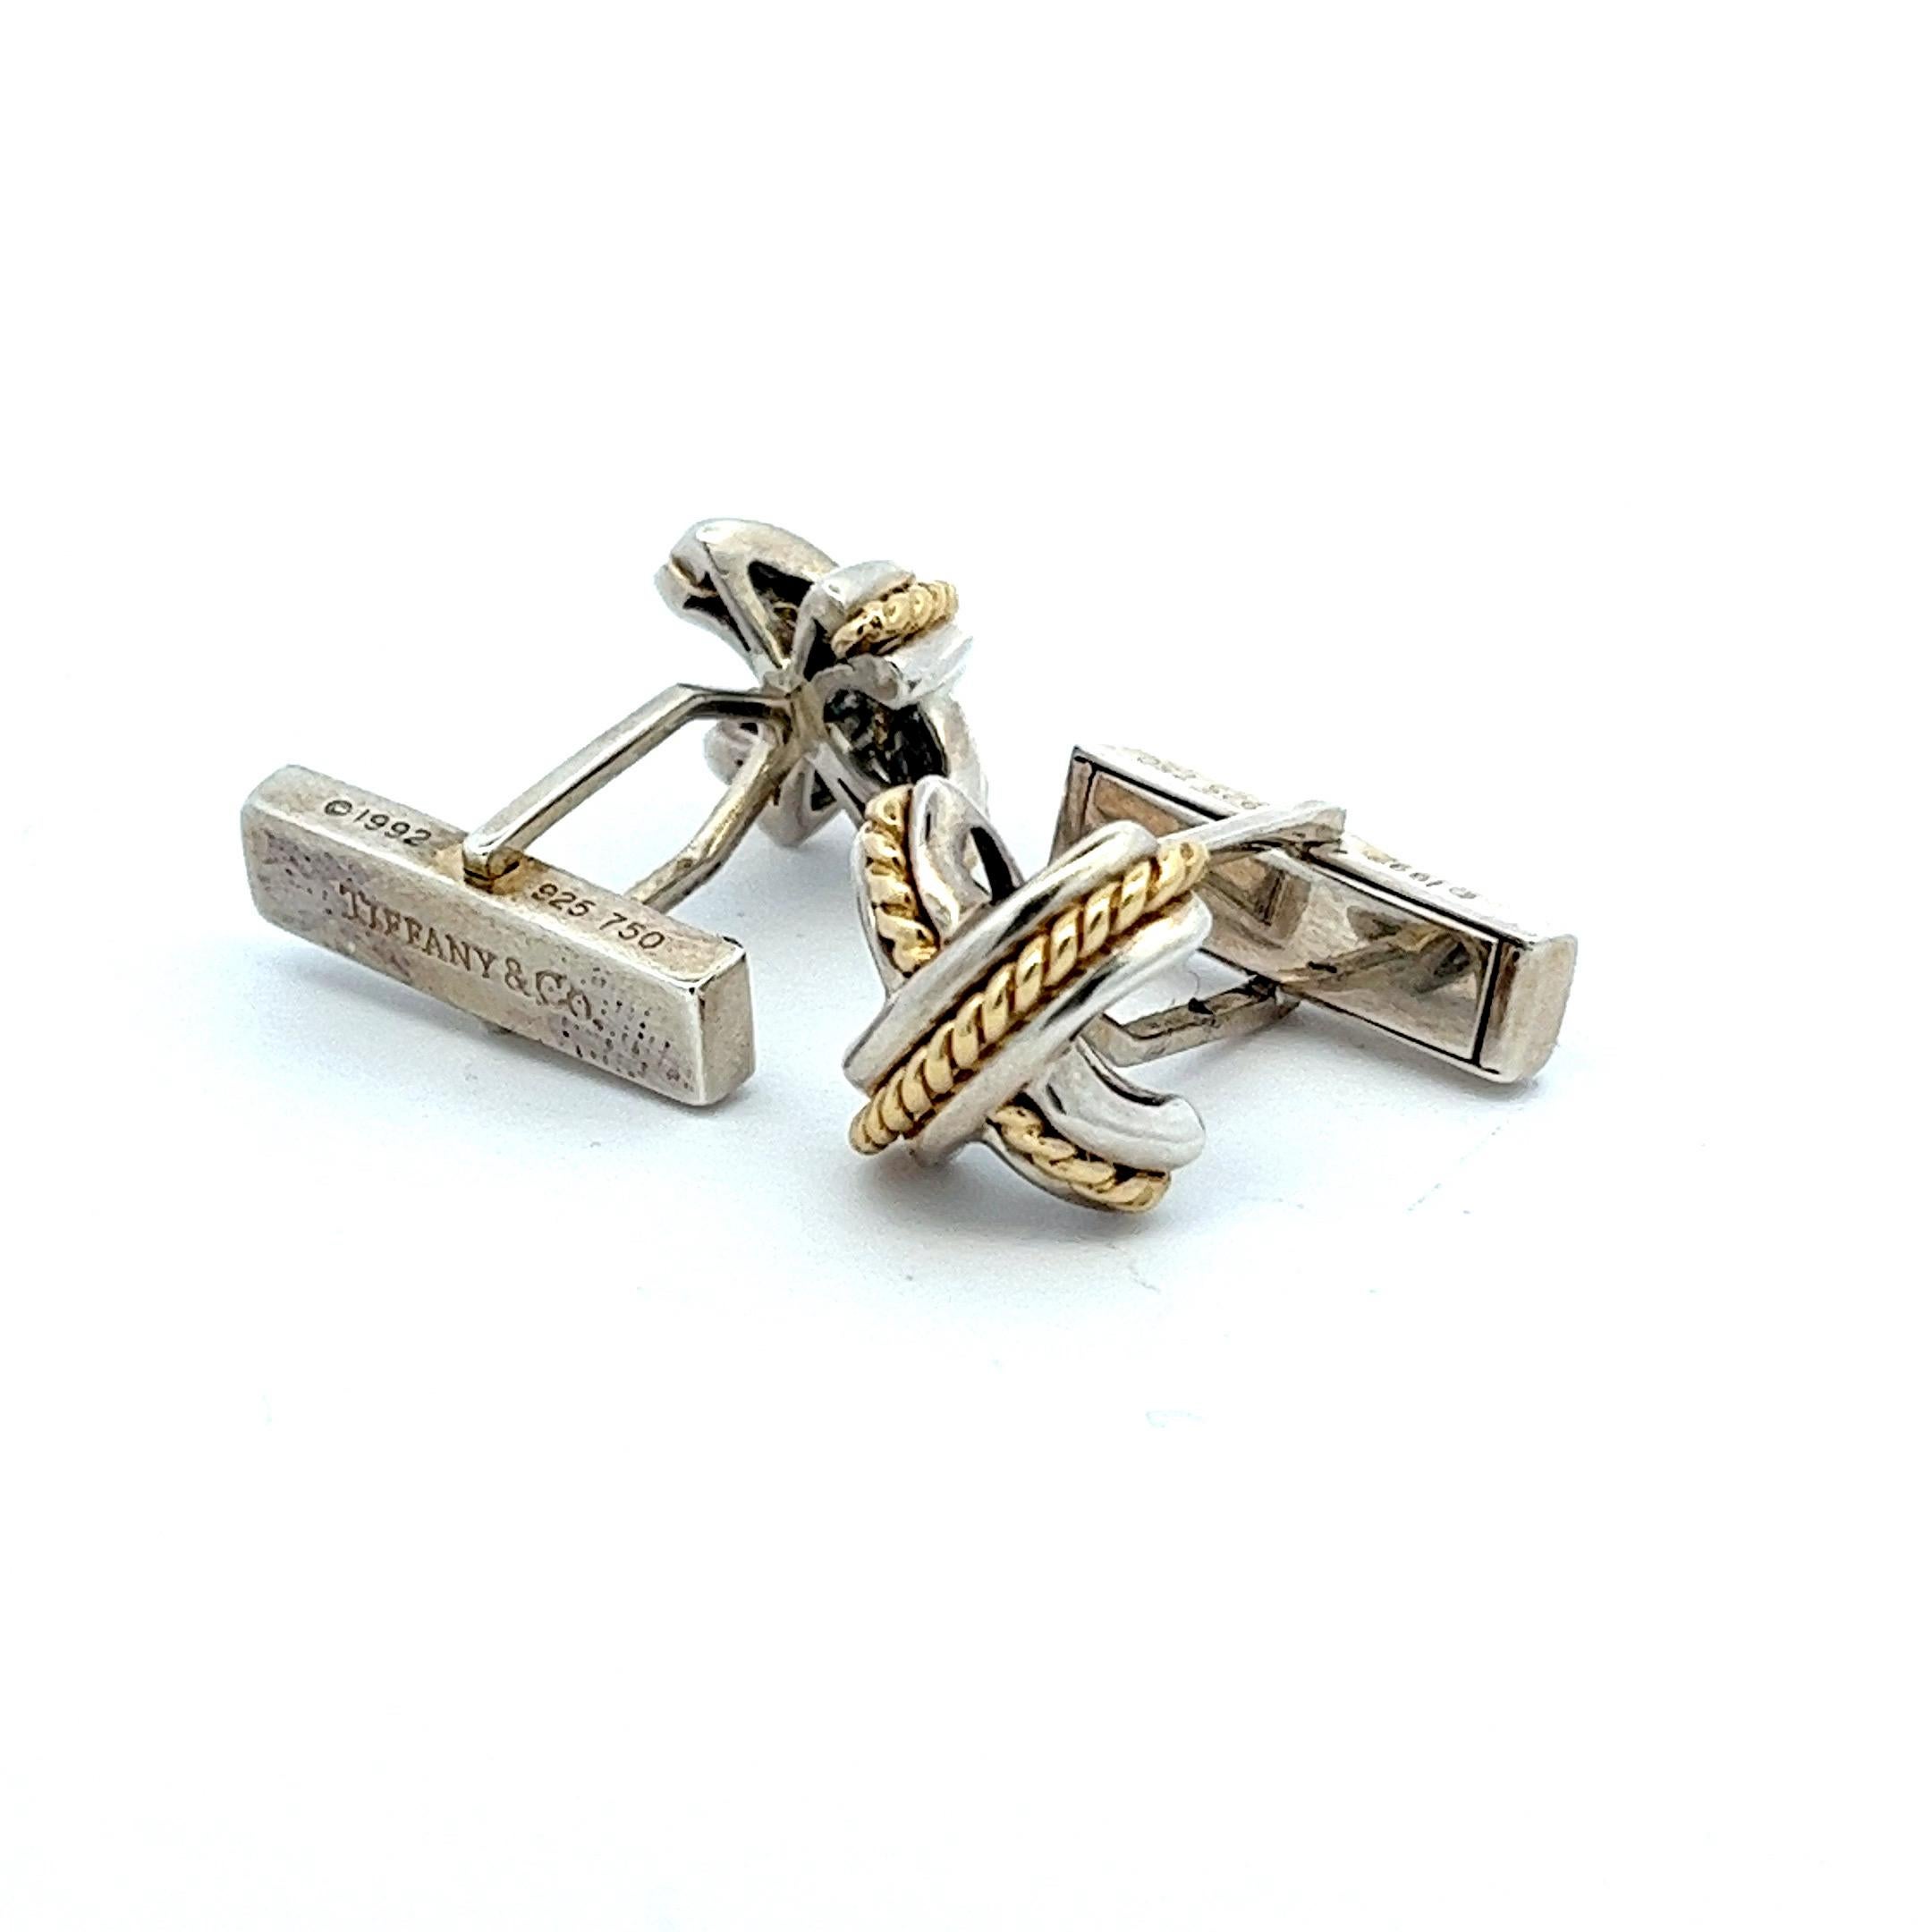 Tiffany & Co.'s cufflinks, belonging to the notable Signature X Cross collection, are designed with sterling silver in the form of an 